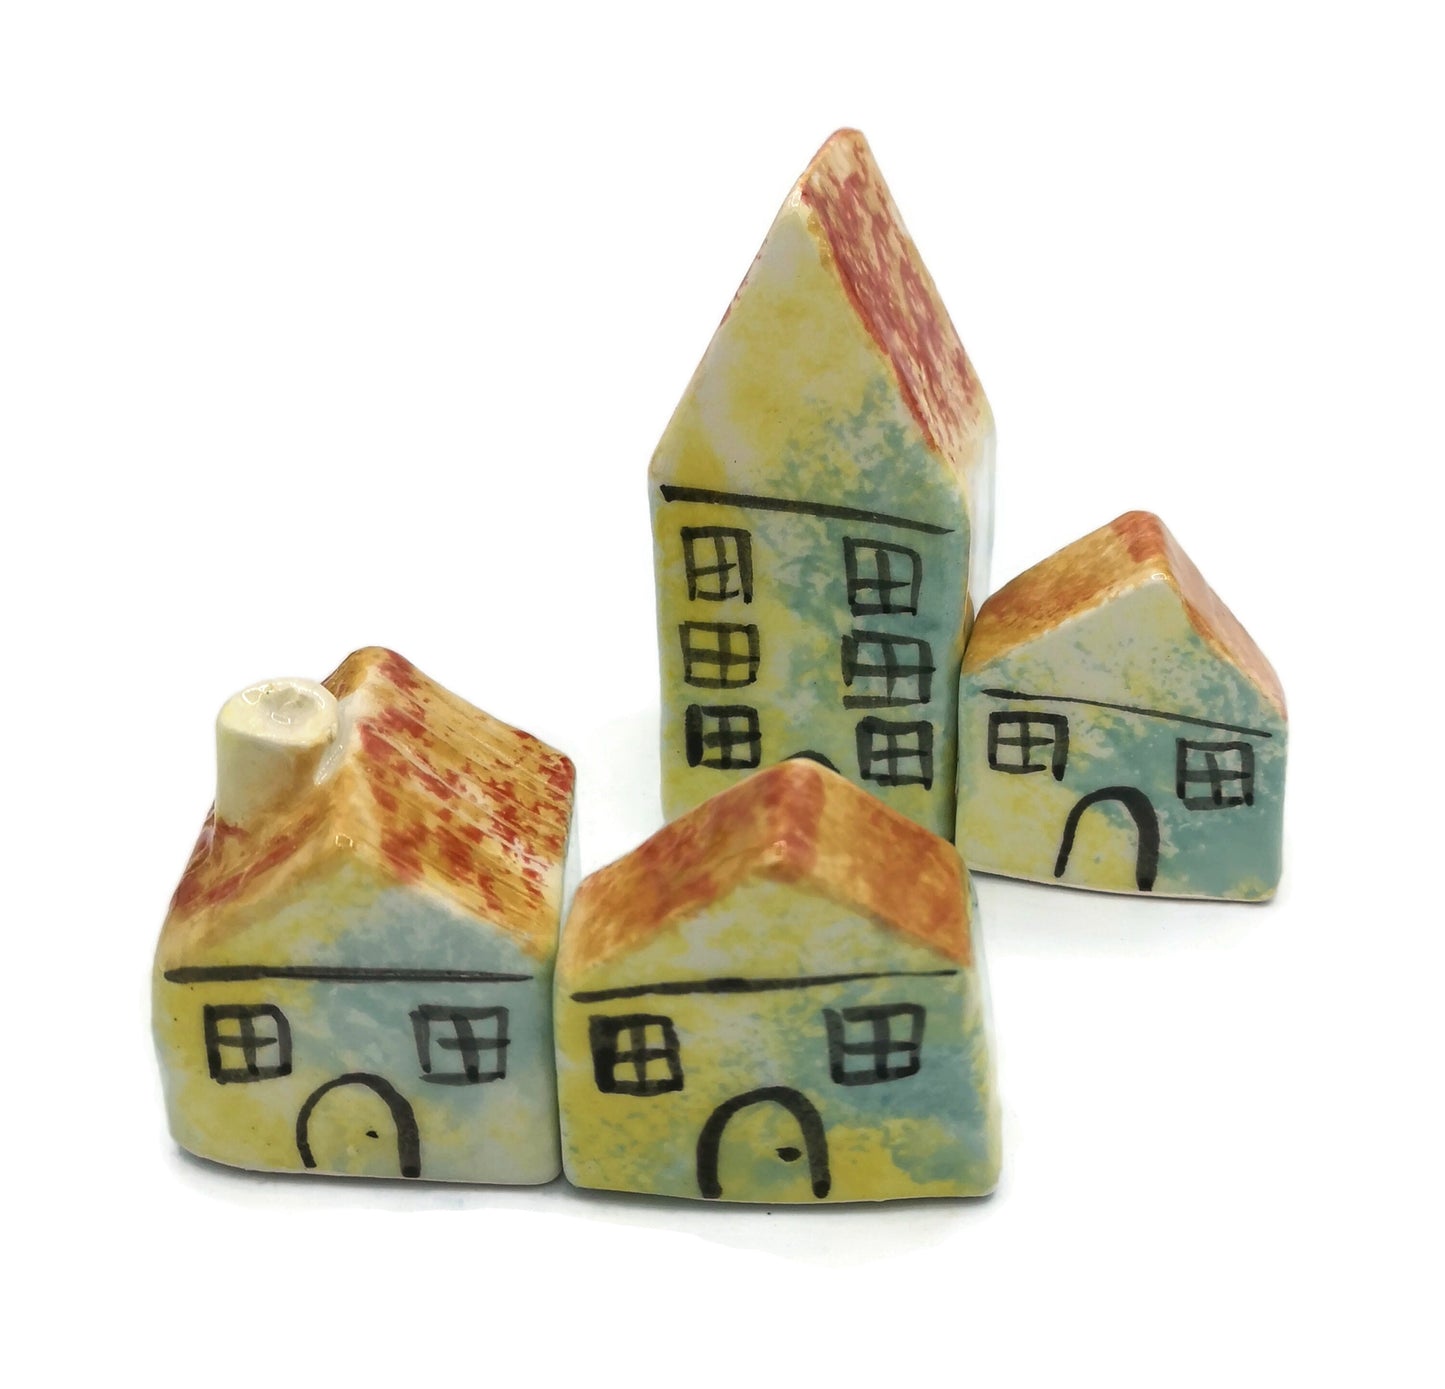 MINIATURE HOUSE, CLAY Sculpture, Set of 4 Ceramic Tiny House, Fathers Day Gift, Housewarming Gift First Home - Ceramica Ana Rafael